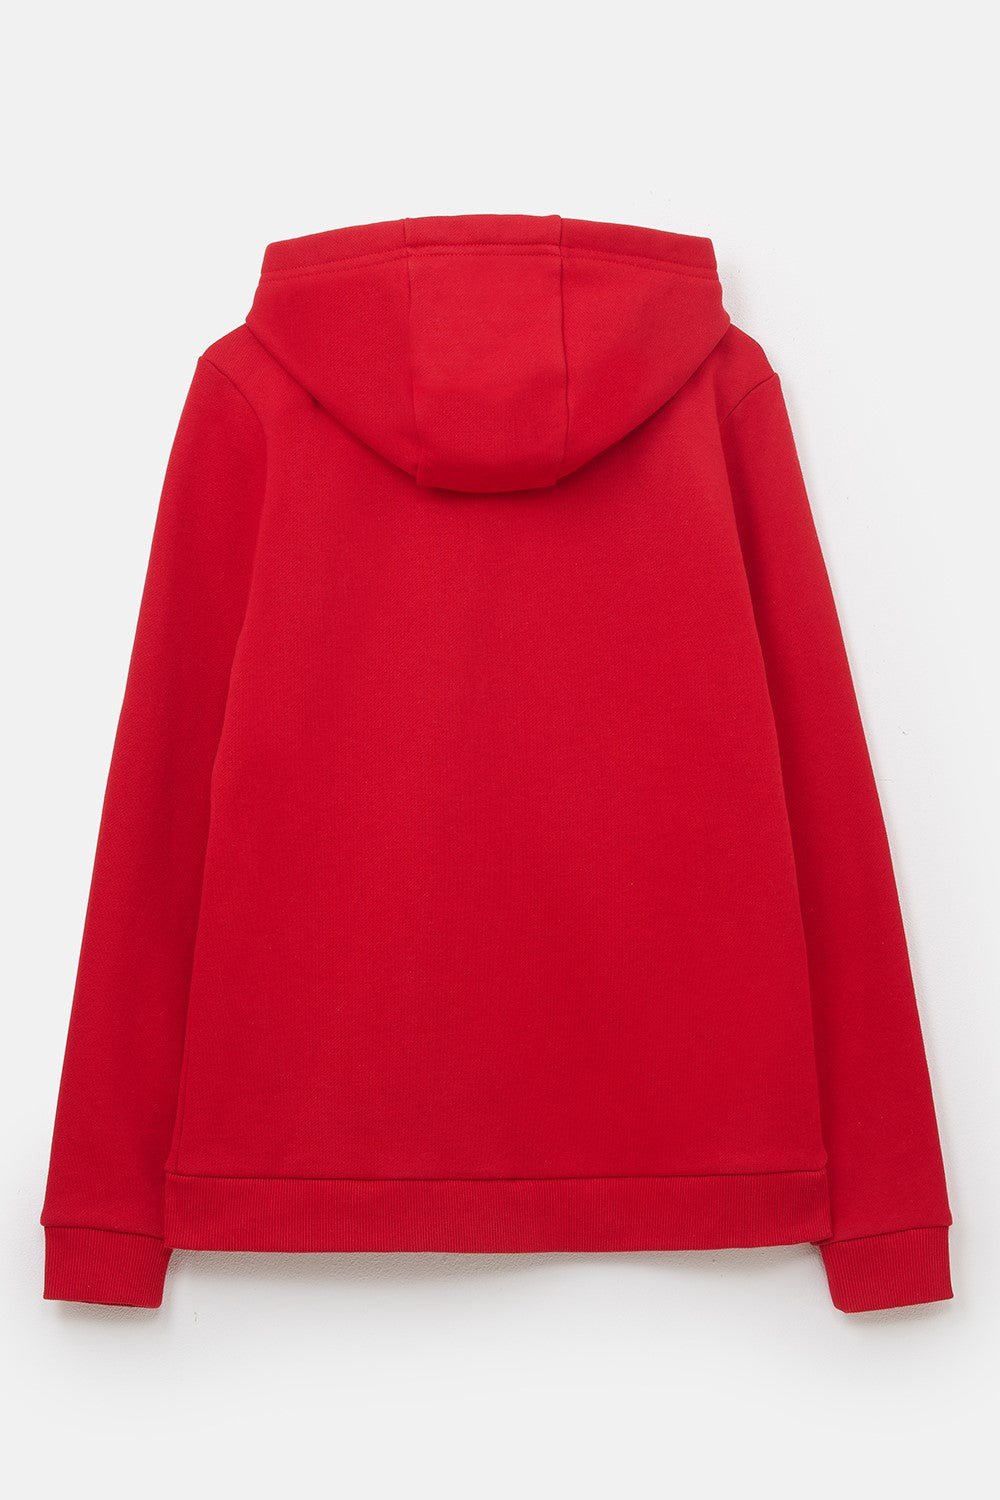 Strand Hooded Top - Red-Lighthouse